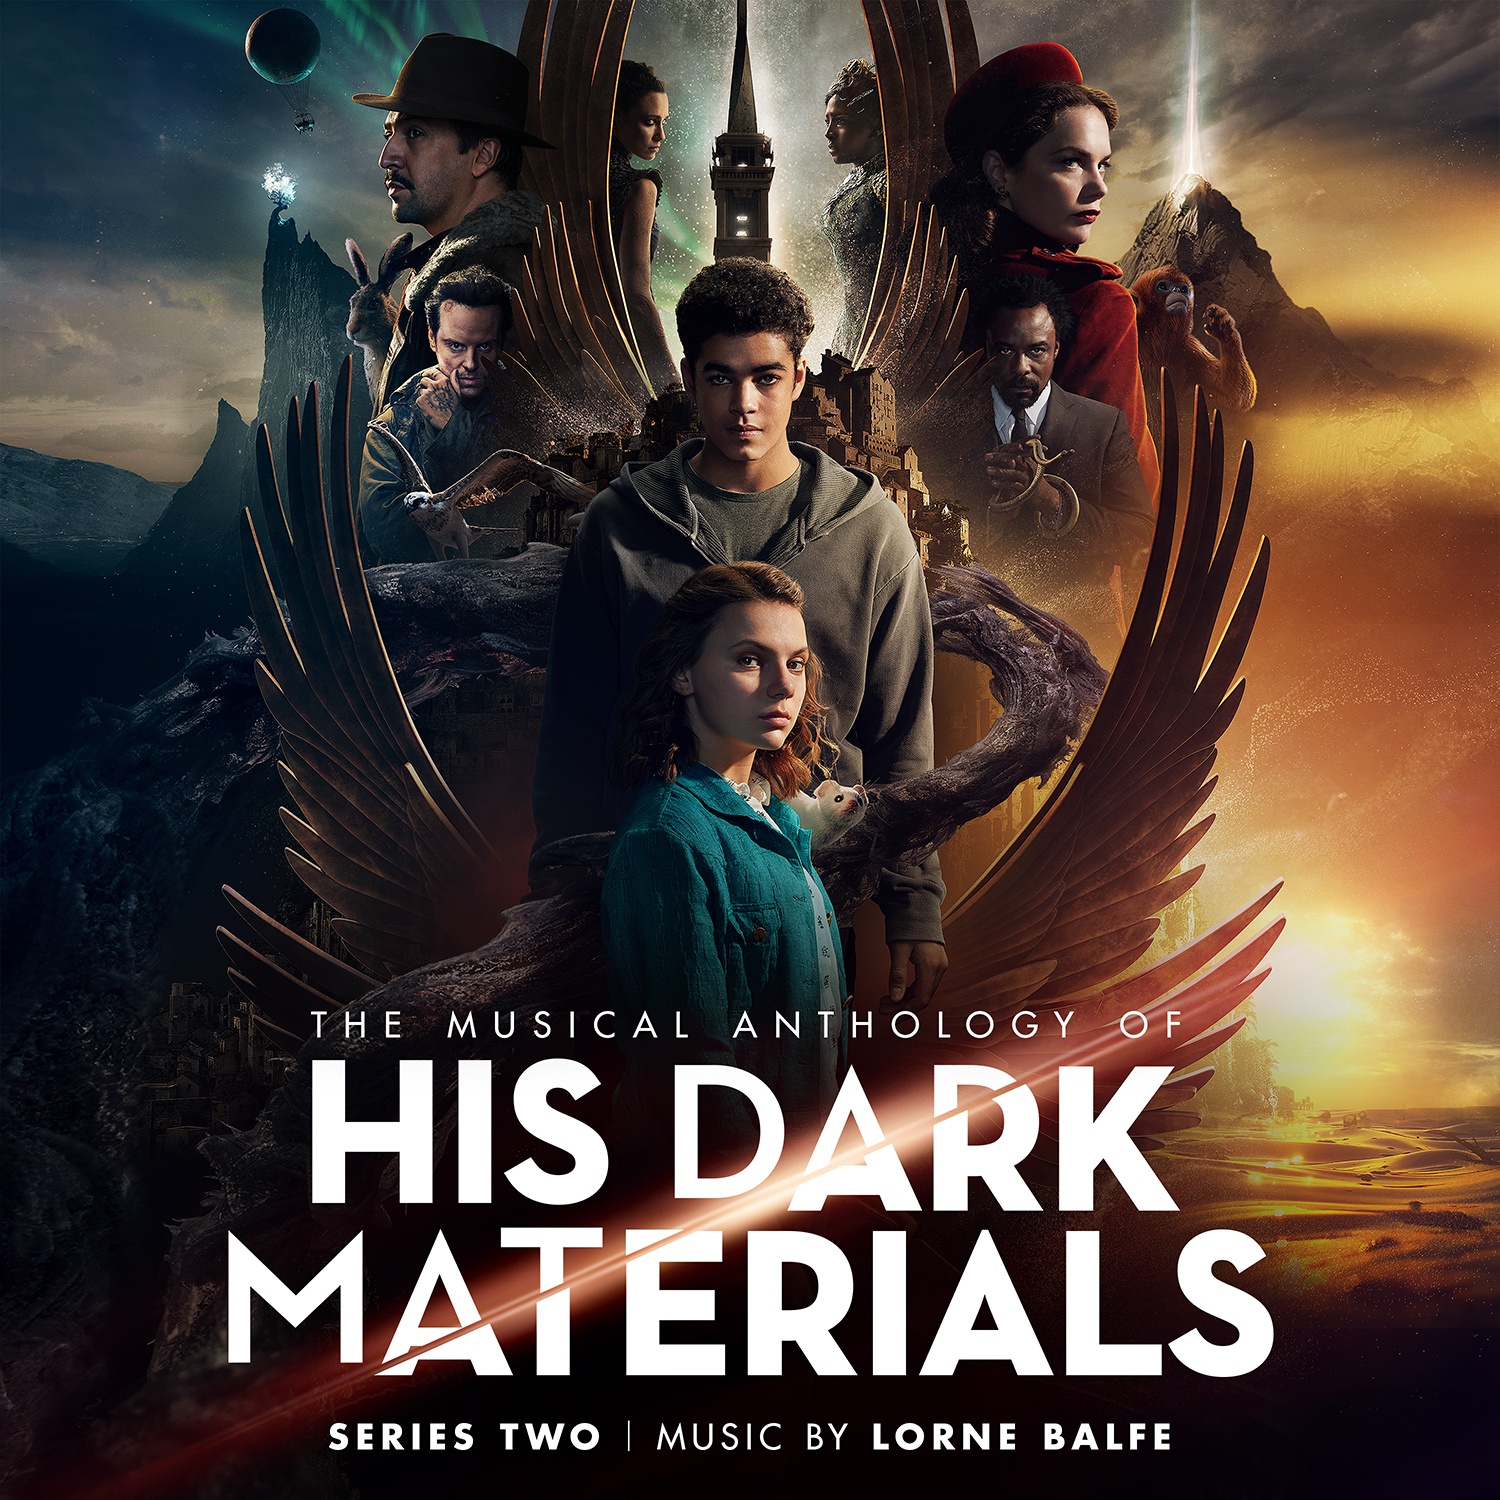 The Musical Anthology of His Dark Materials series 2